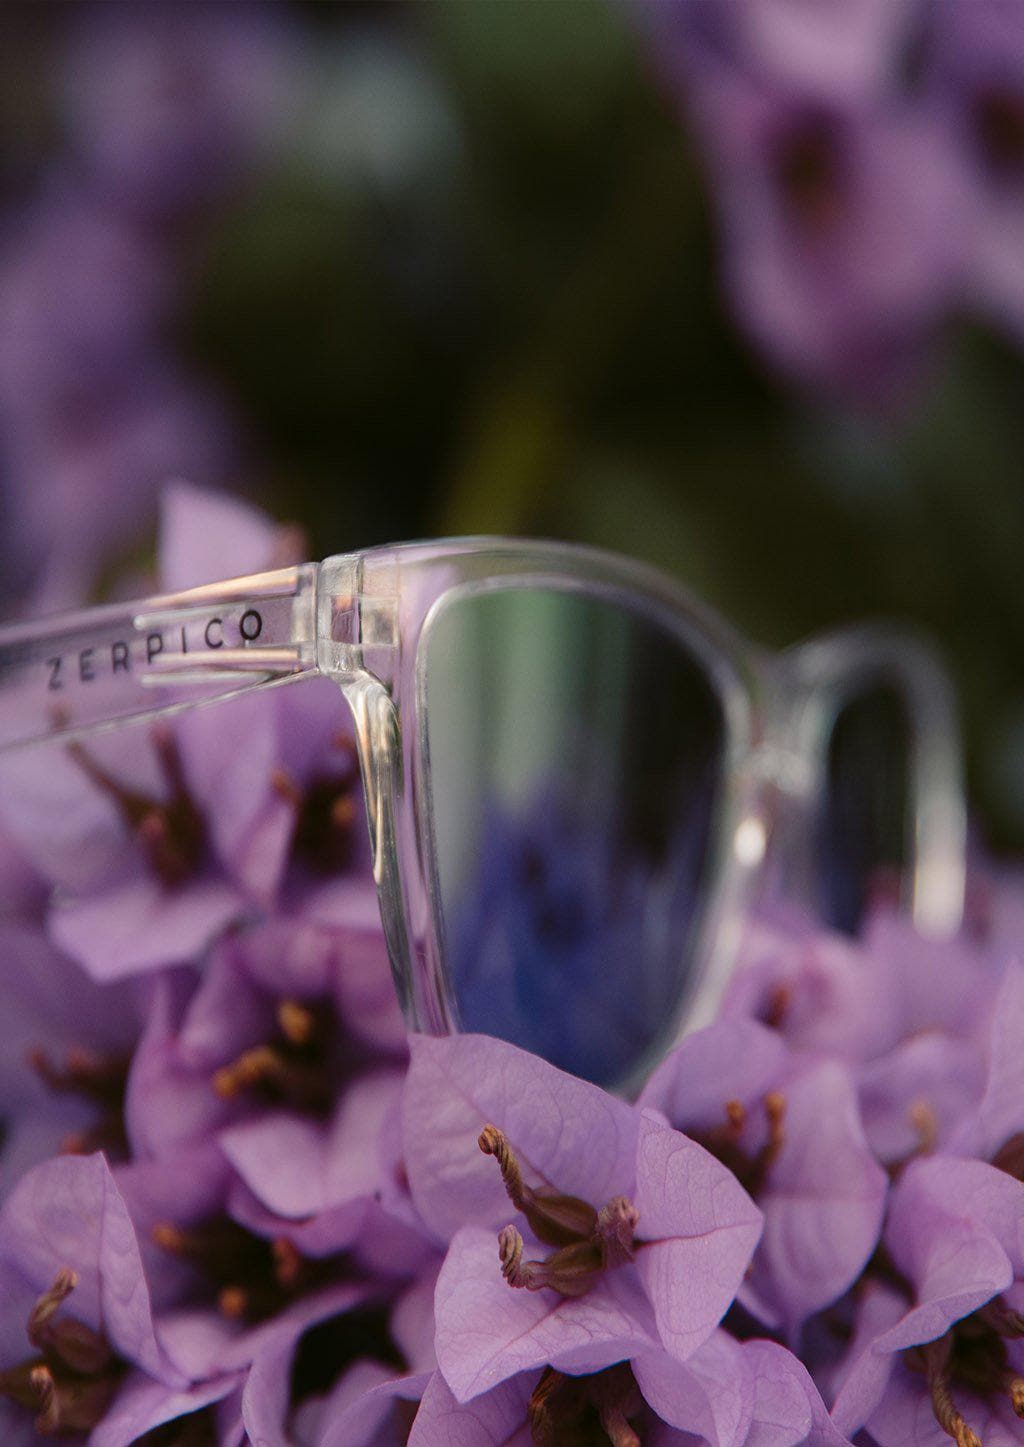 Our Mood V2 is an improved version of our last wayfarers. Plastic body for great quality and durabilty. This is Lucid with transparent frame and purple mirror lenses. Lifestyle shoot outside.